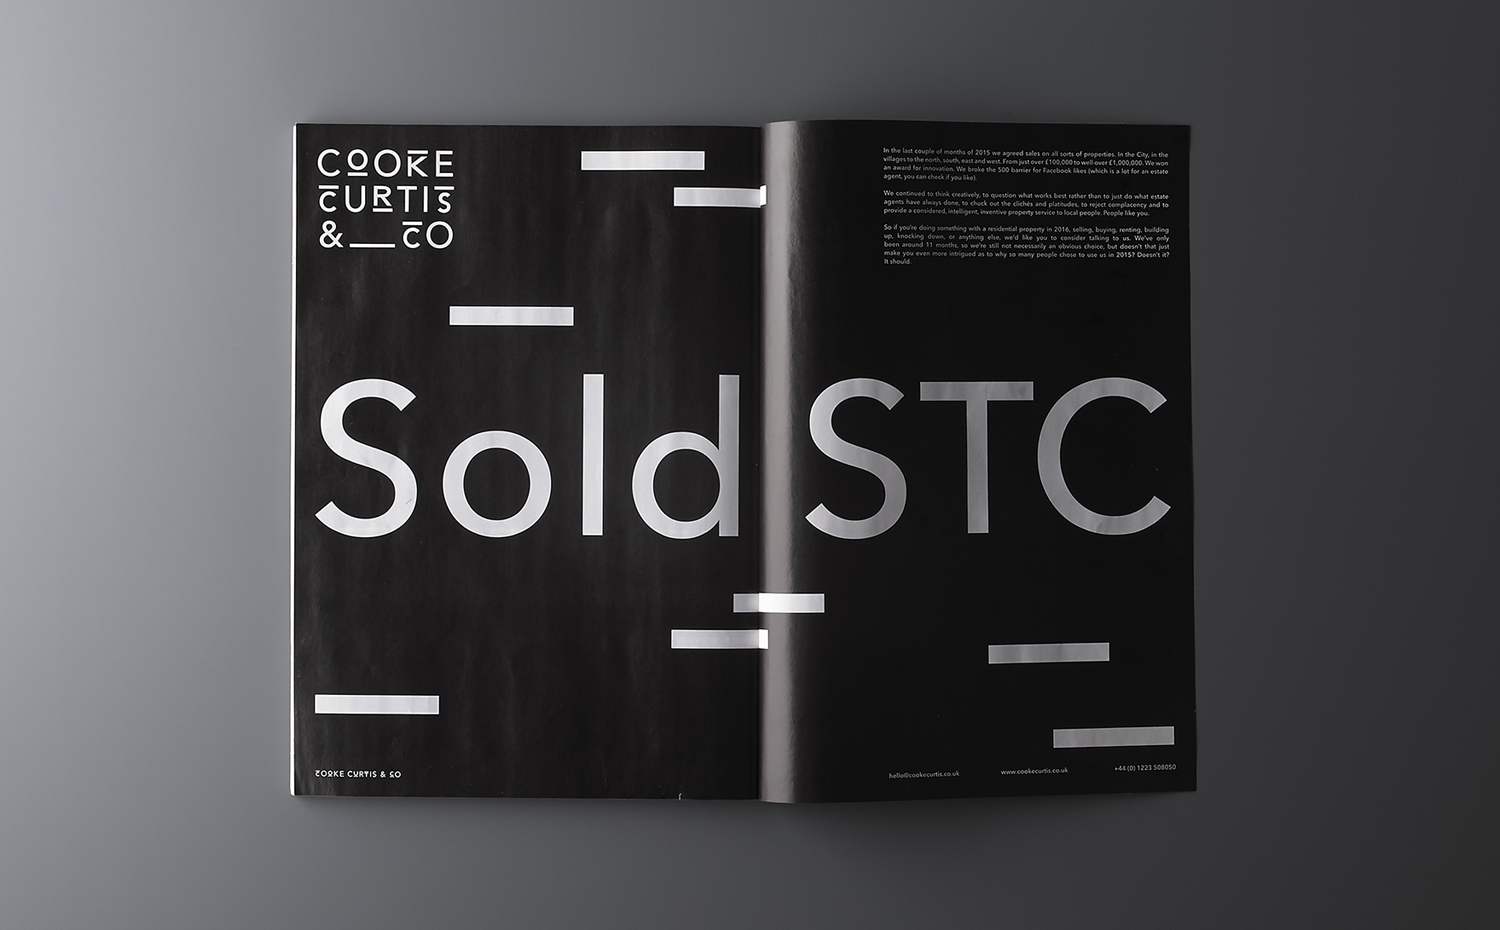 Brand identity and spread for UK estate agent Cooke Curtis & Co. by graphic design studio The District, United Kingdom